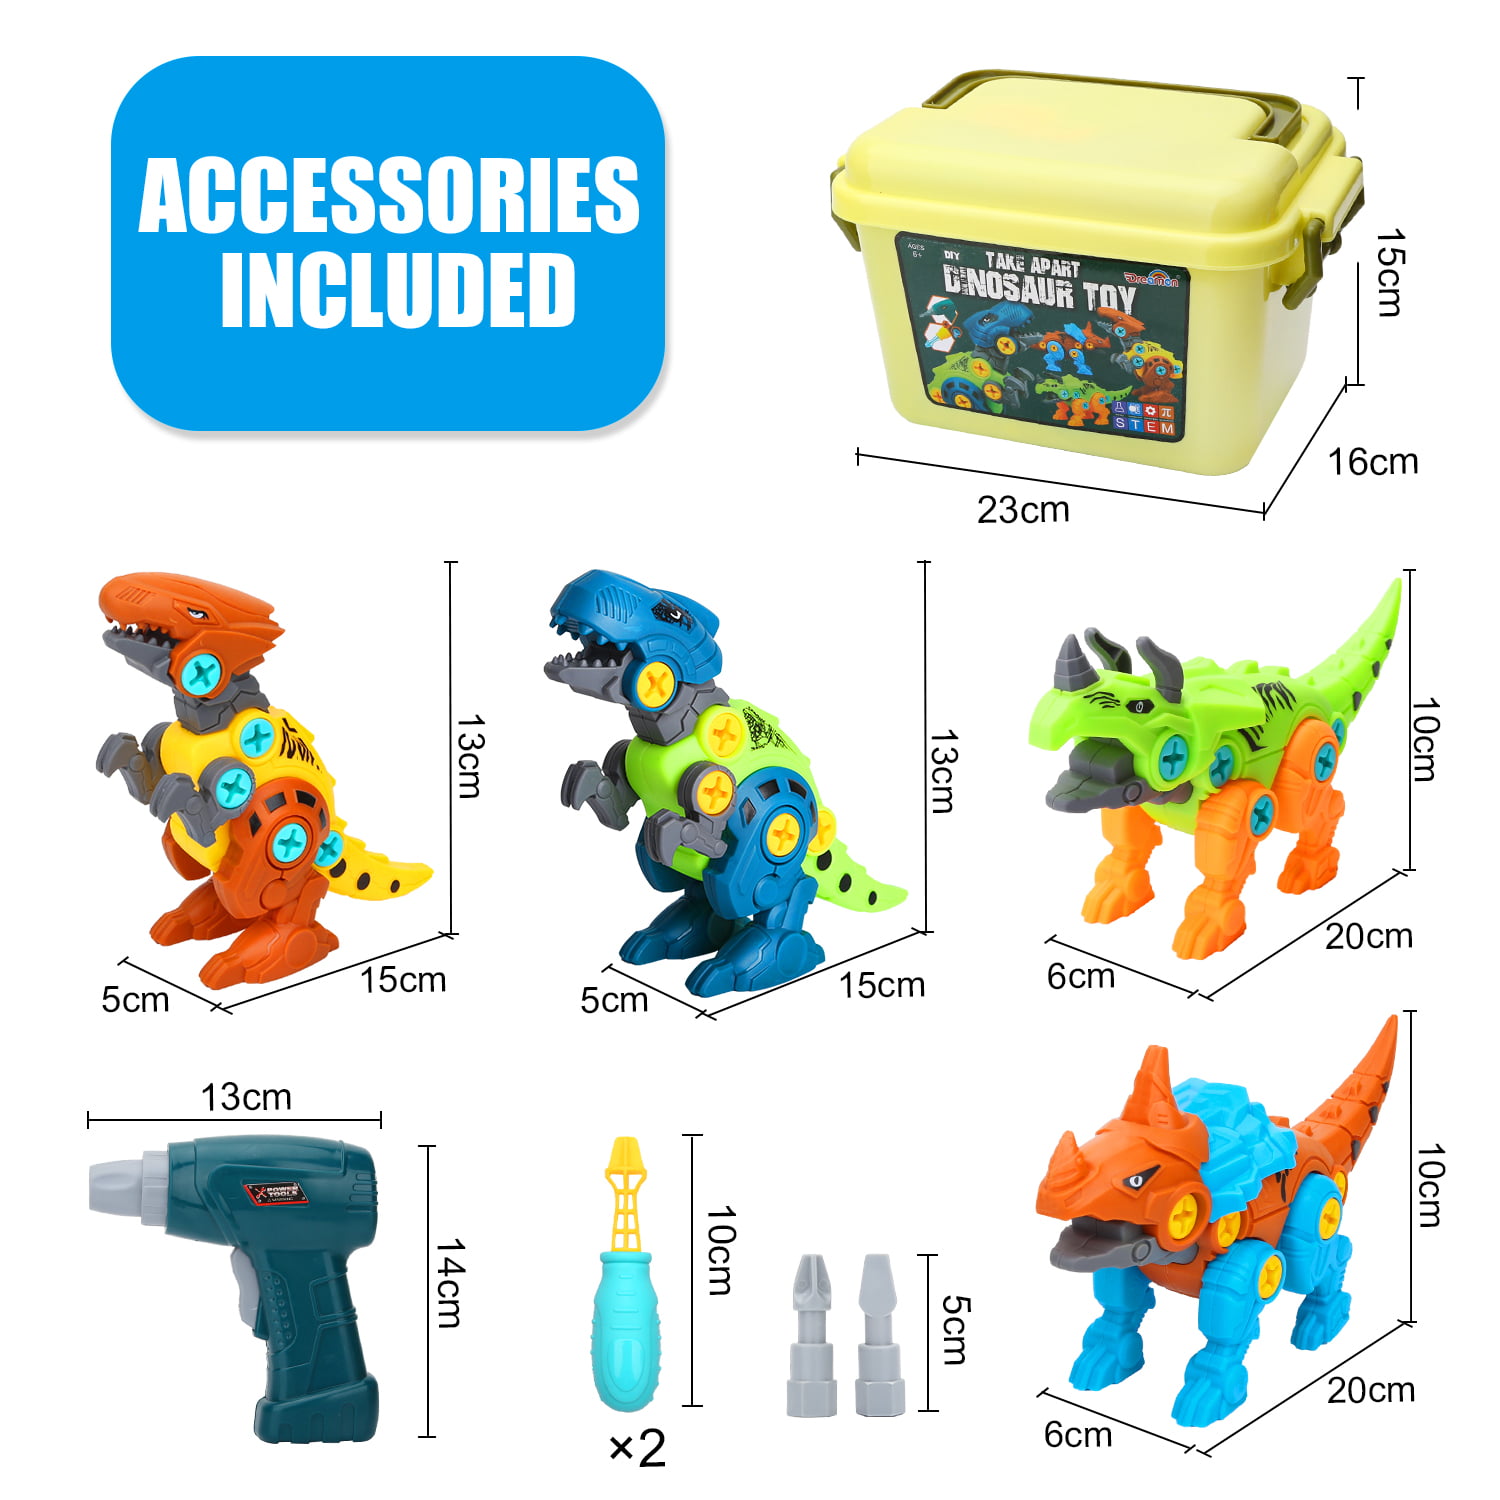 DIY Dreamon Take Apart Dinosaur Toys for Kids with Storage Box Electric Drill